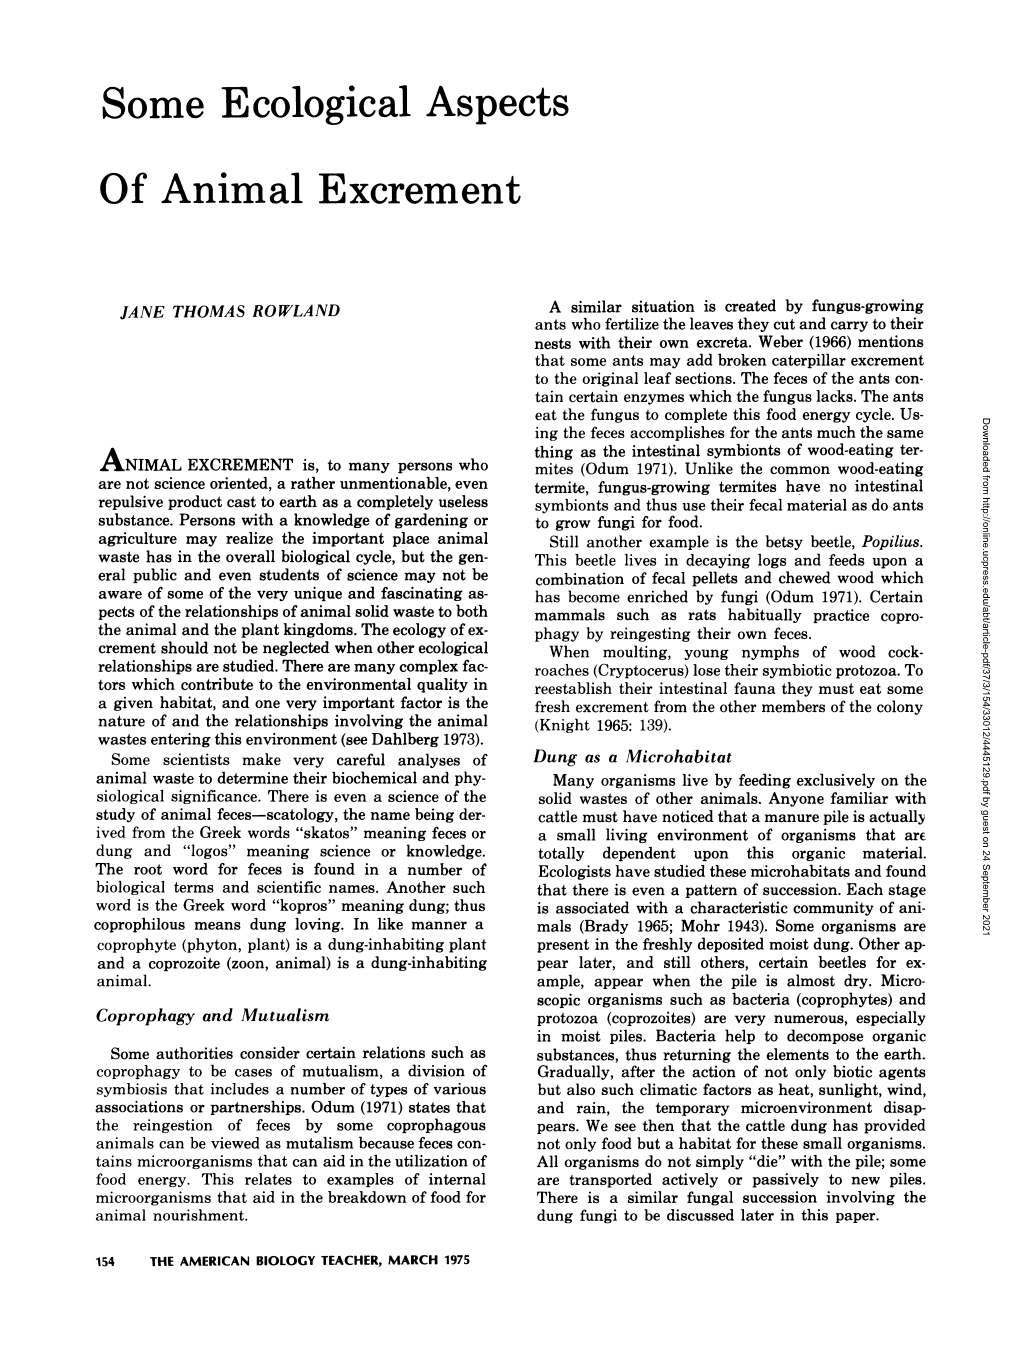 Some Ecological Aspects of Animal Excrement